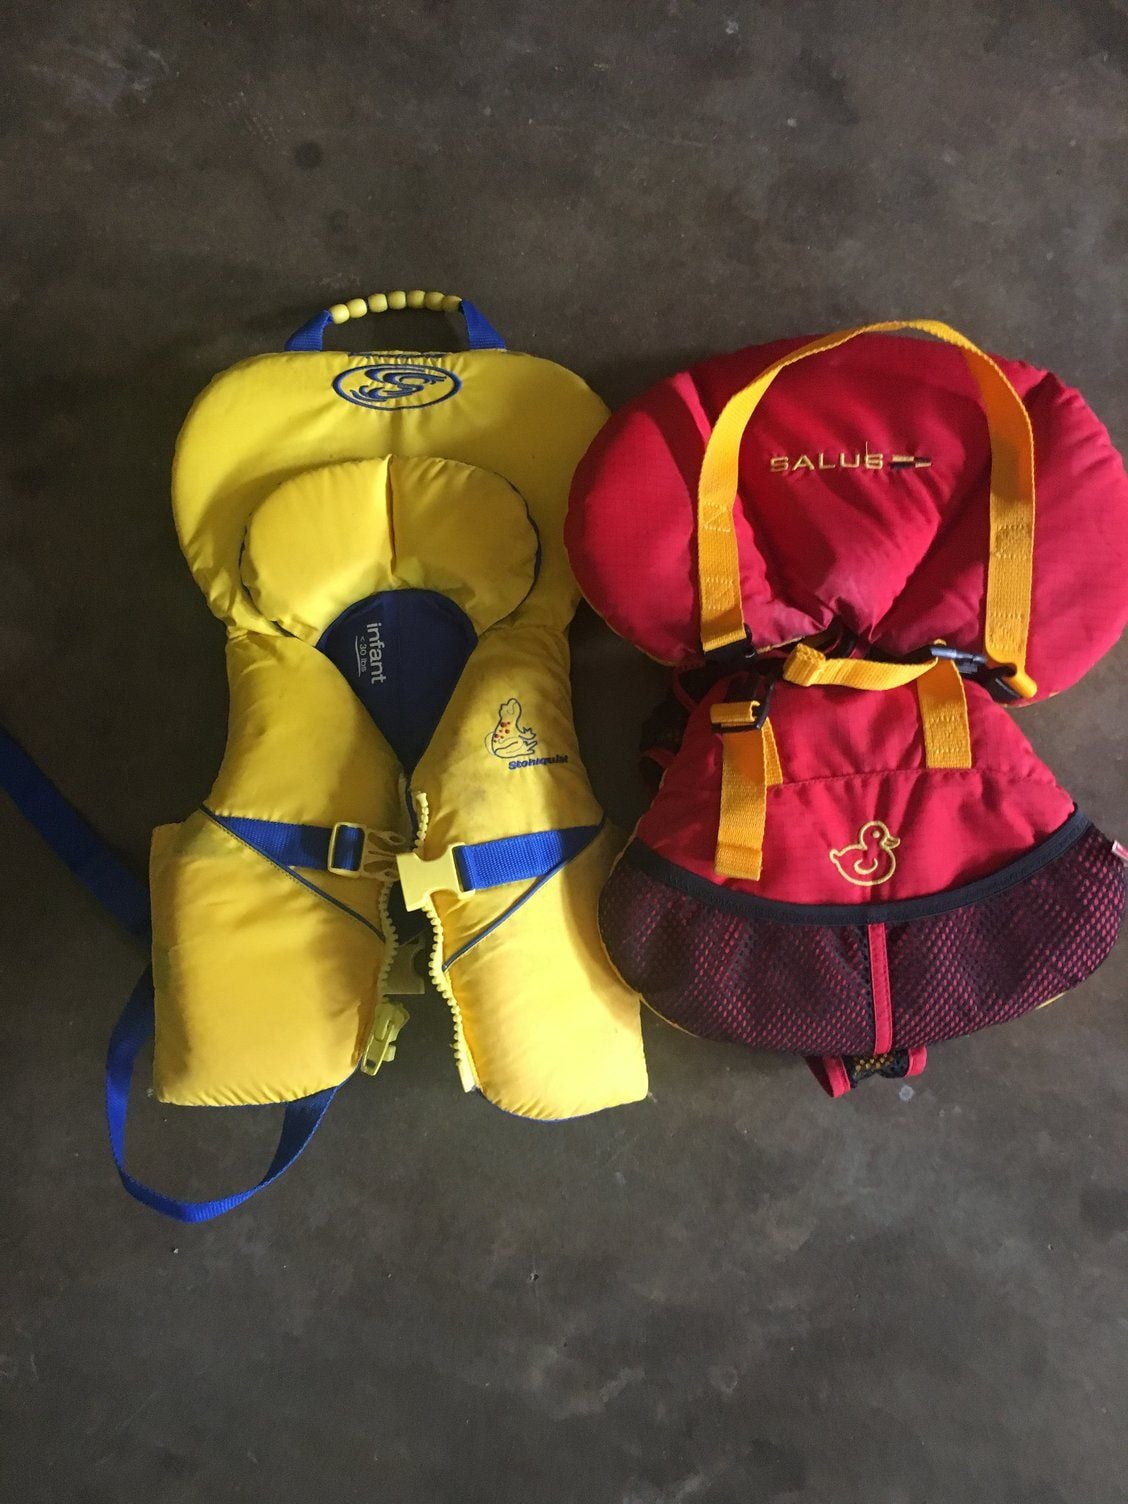 Infant life jacket recommendations - The Hull Truth - Boating and Fishing  Forum